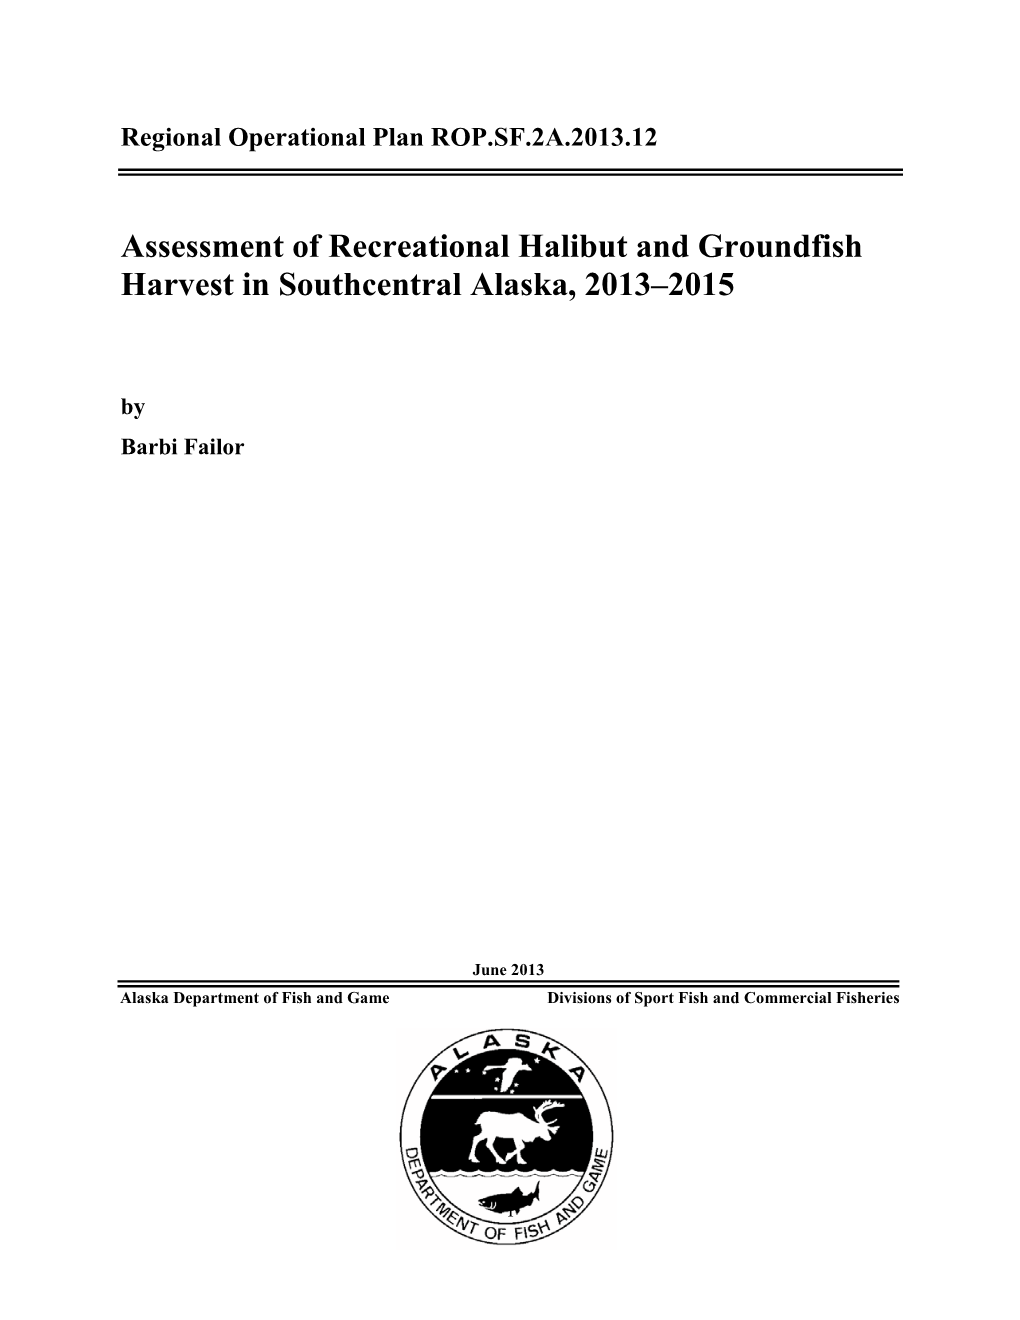 Assessment of Recreational Halibut and Groundfish Harvest in Southcentral Alaska, 2013–2015